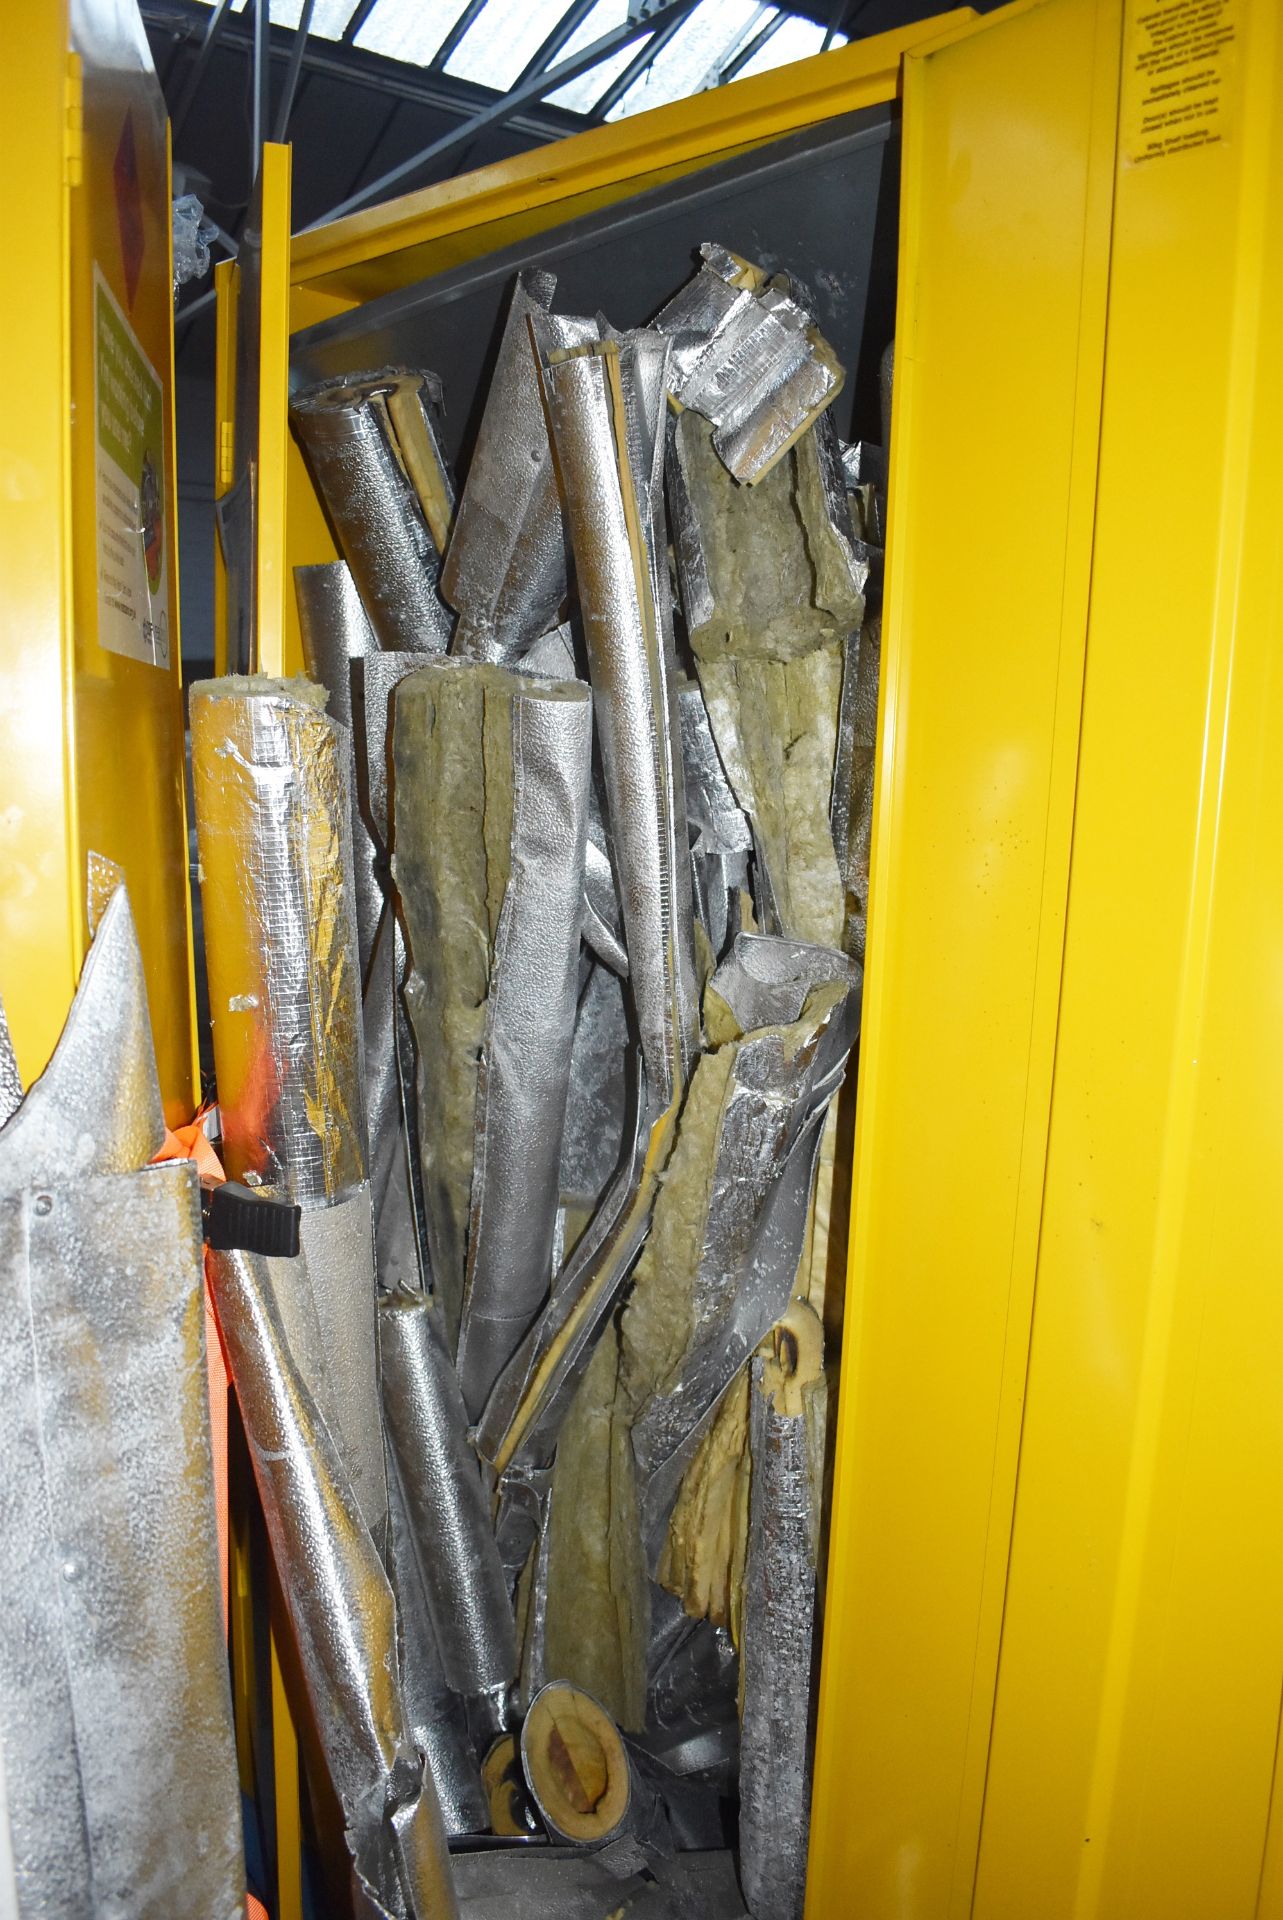 Large Quantity of Thermal Pipe Covering Contents of Two Upright Cabinets - Cabinets Not Included - - Image 3 of 10